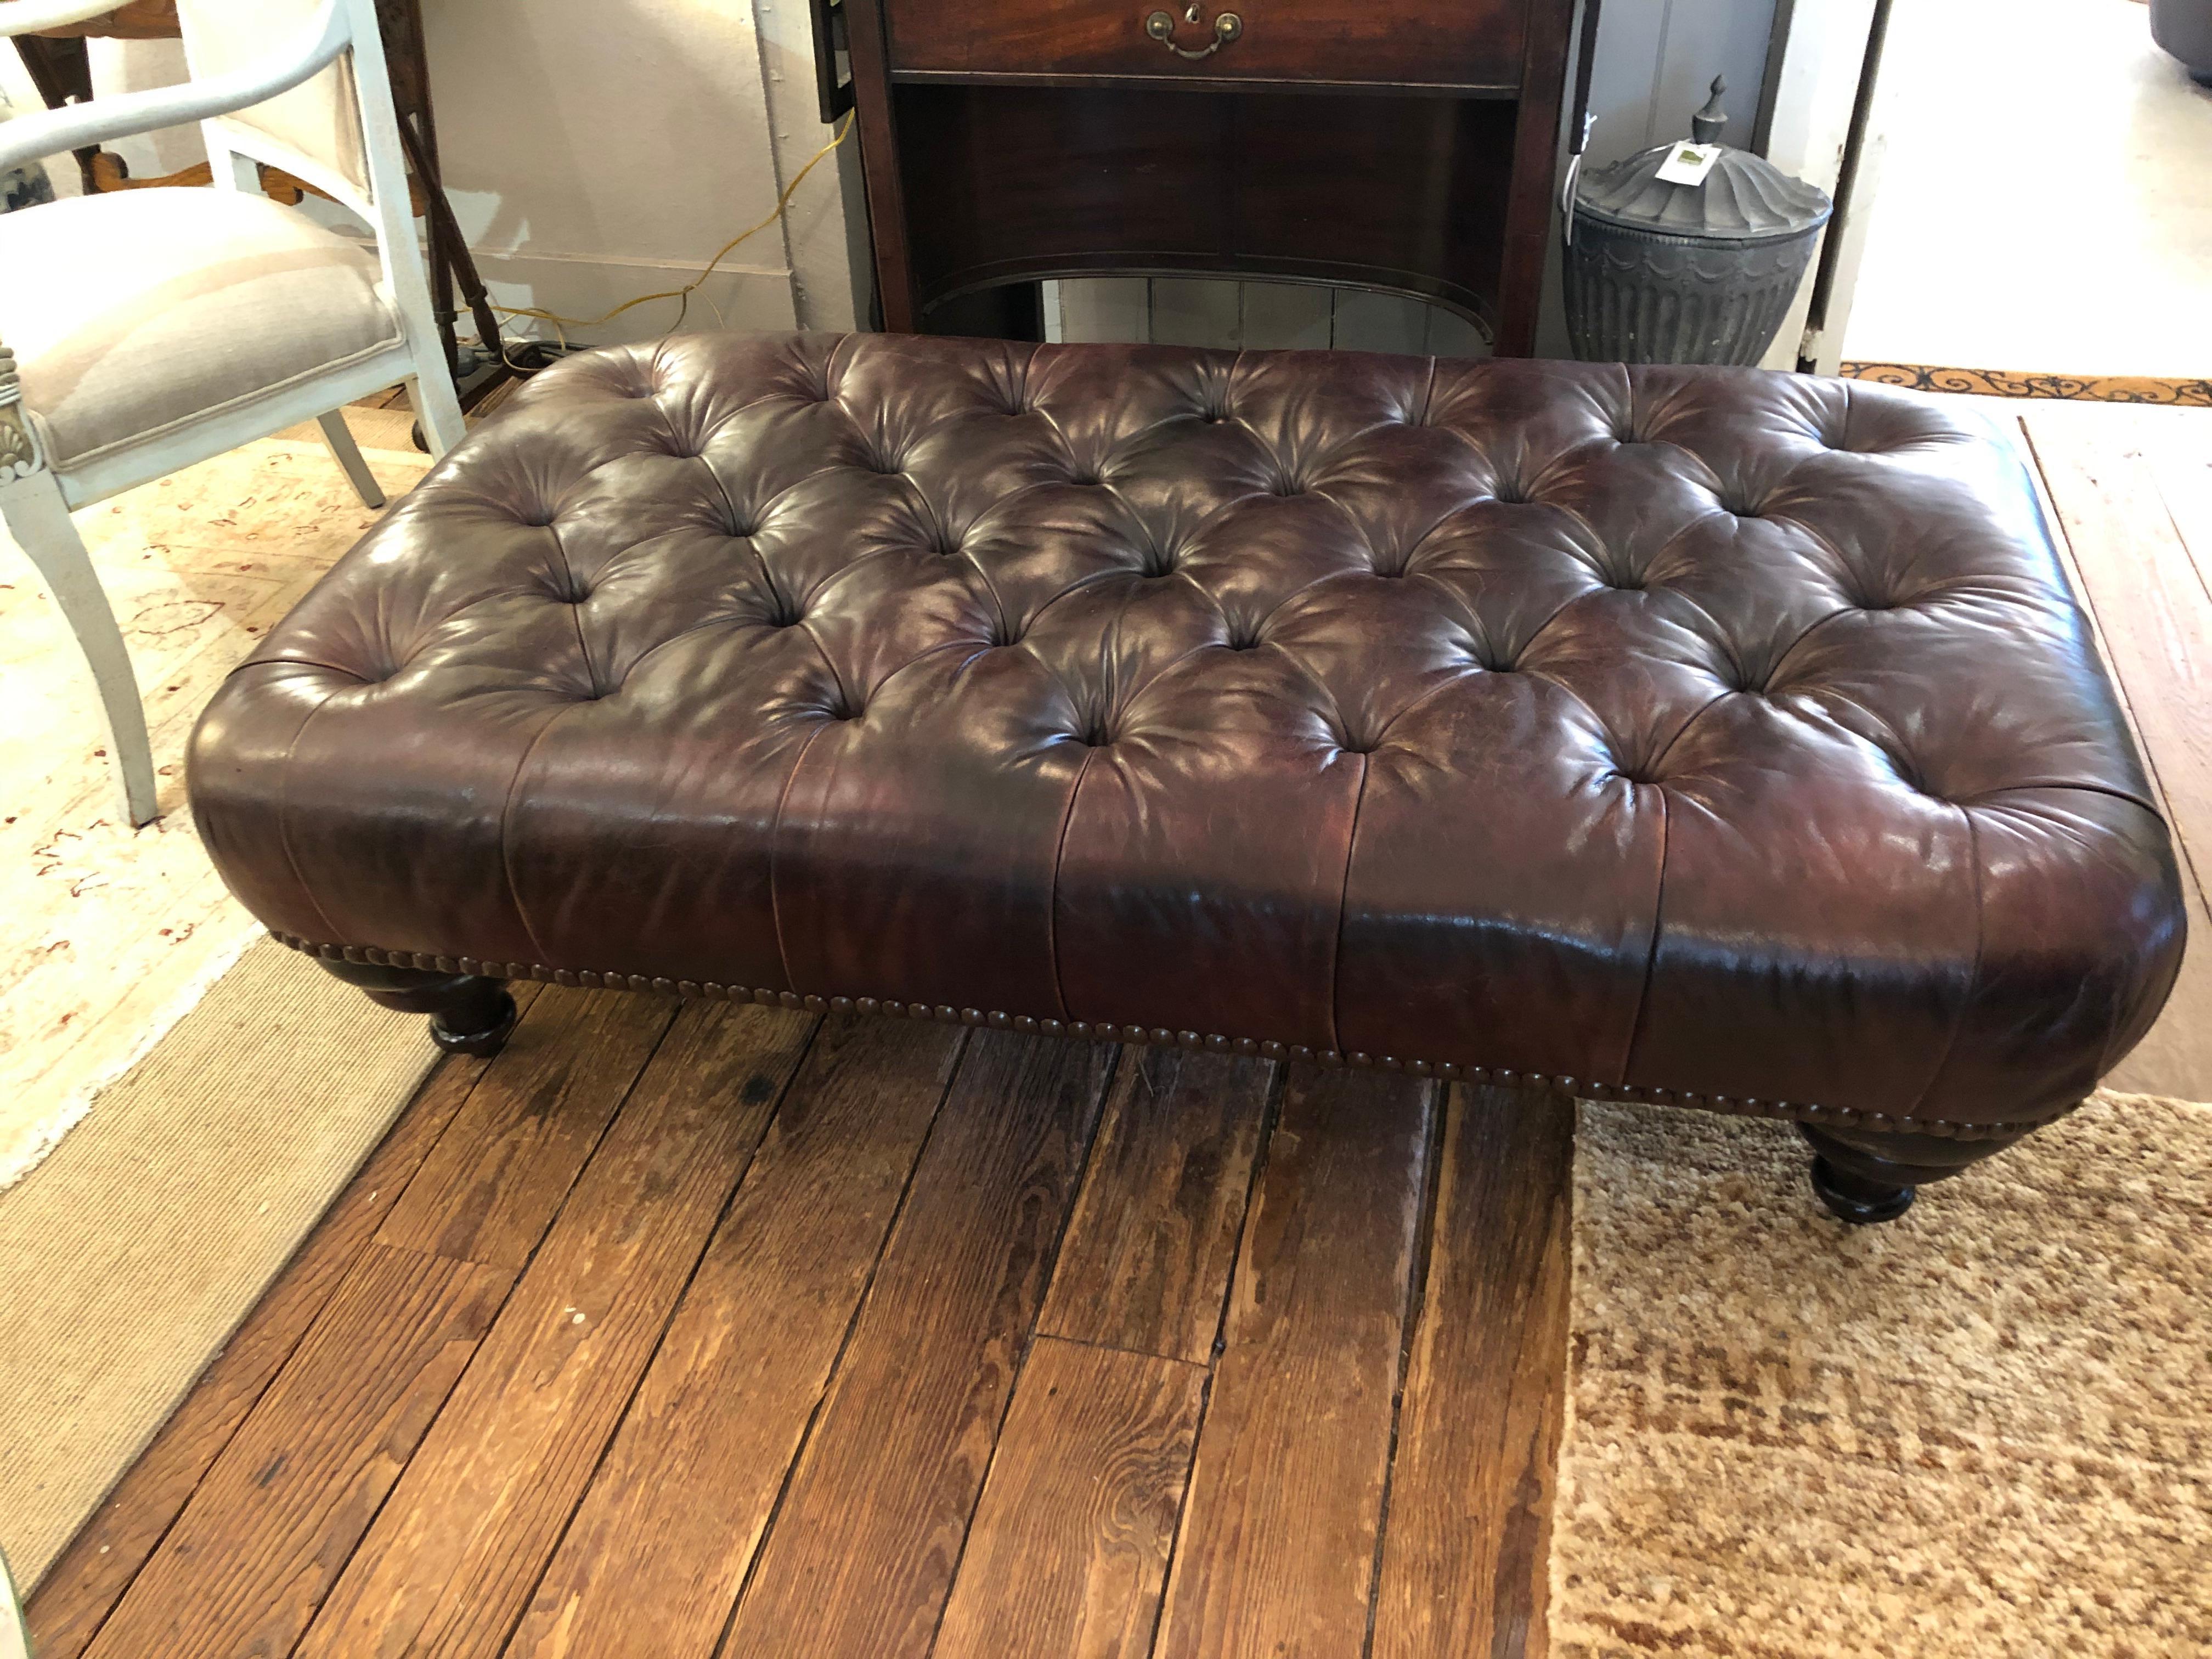 Classic rich George Smith tobacco tufted leather ottoman in the chesterfield style having mahogany bun feet and brass nailheads around the base. Label underneath. Newly oiled and waxed and to its utmost luxuriousness!